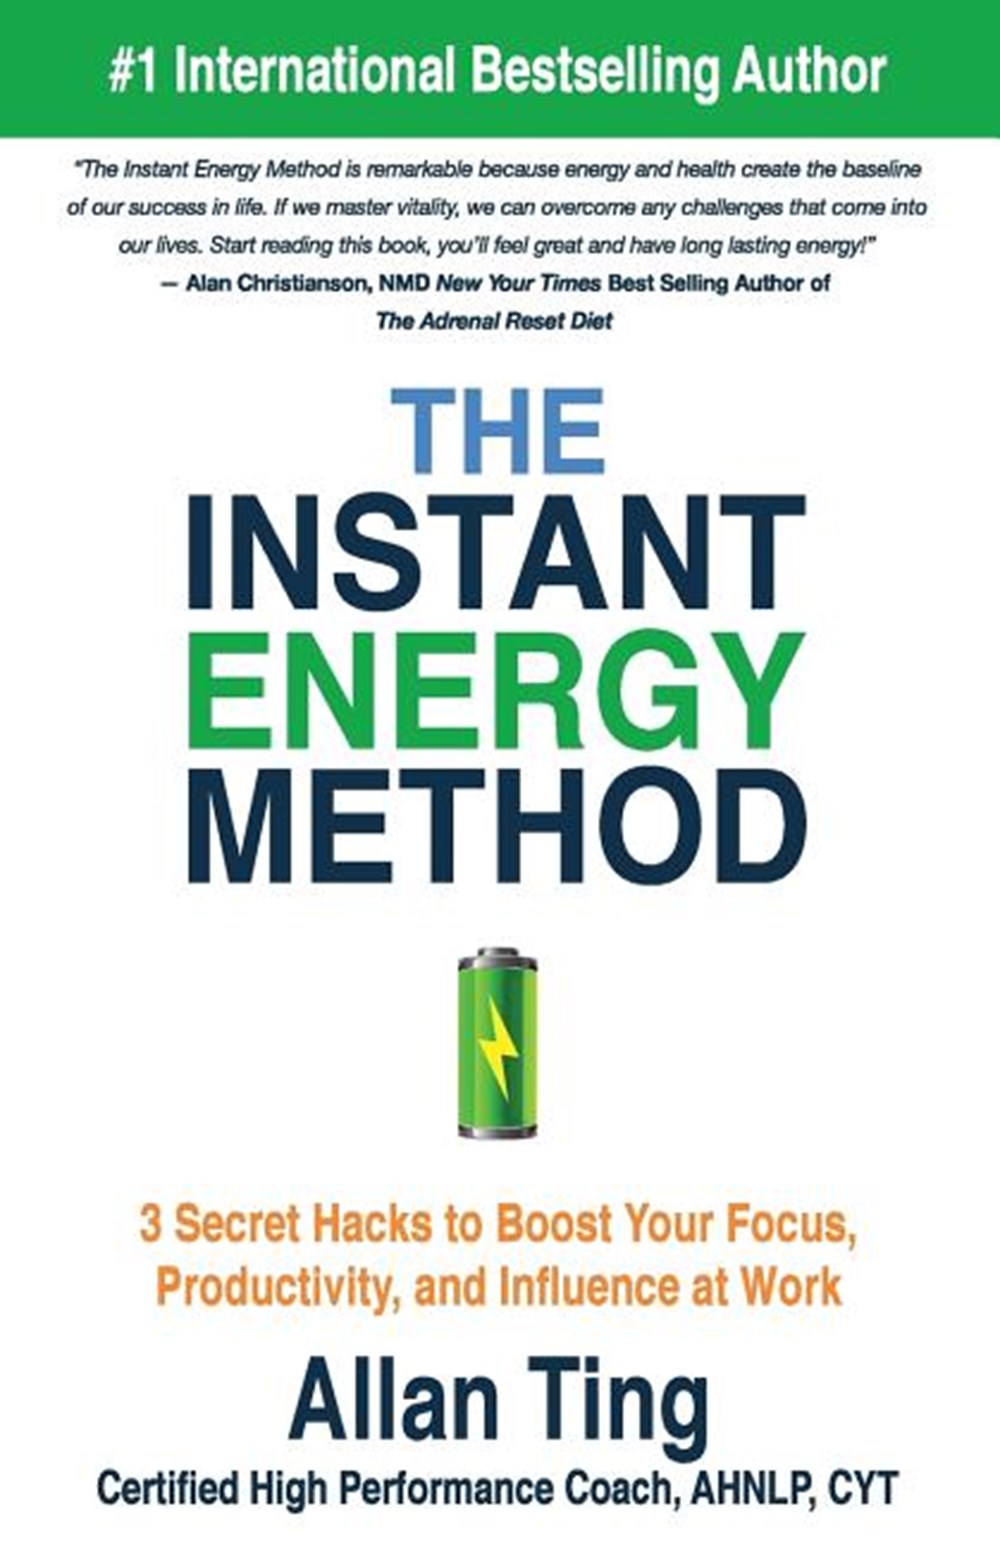 Instant Energy Method: 3 Secret Hacks to Boost Your Focus, Productivity, and Influence at Work